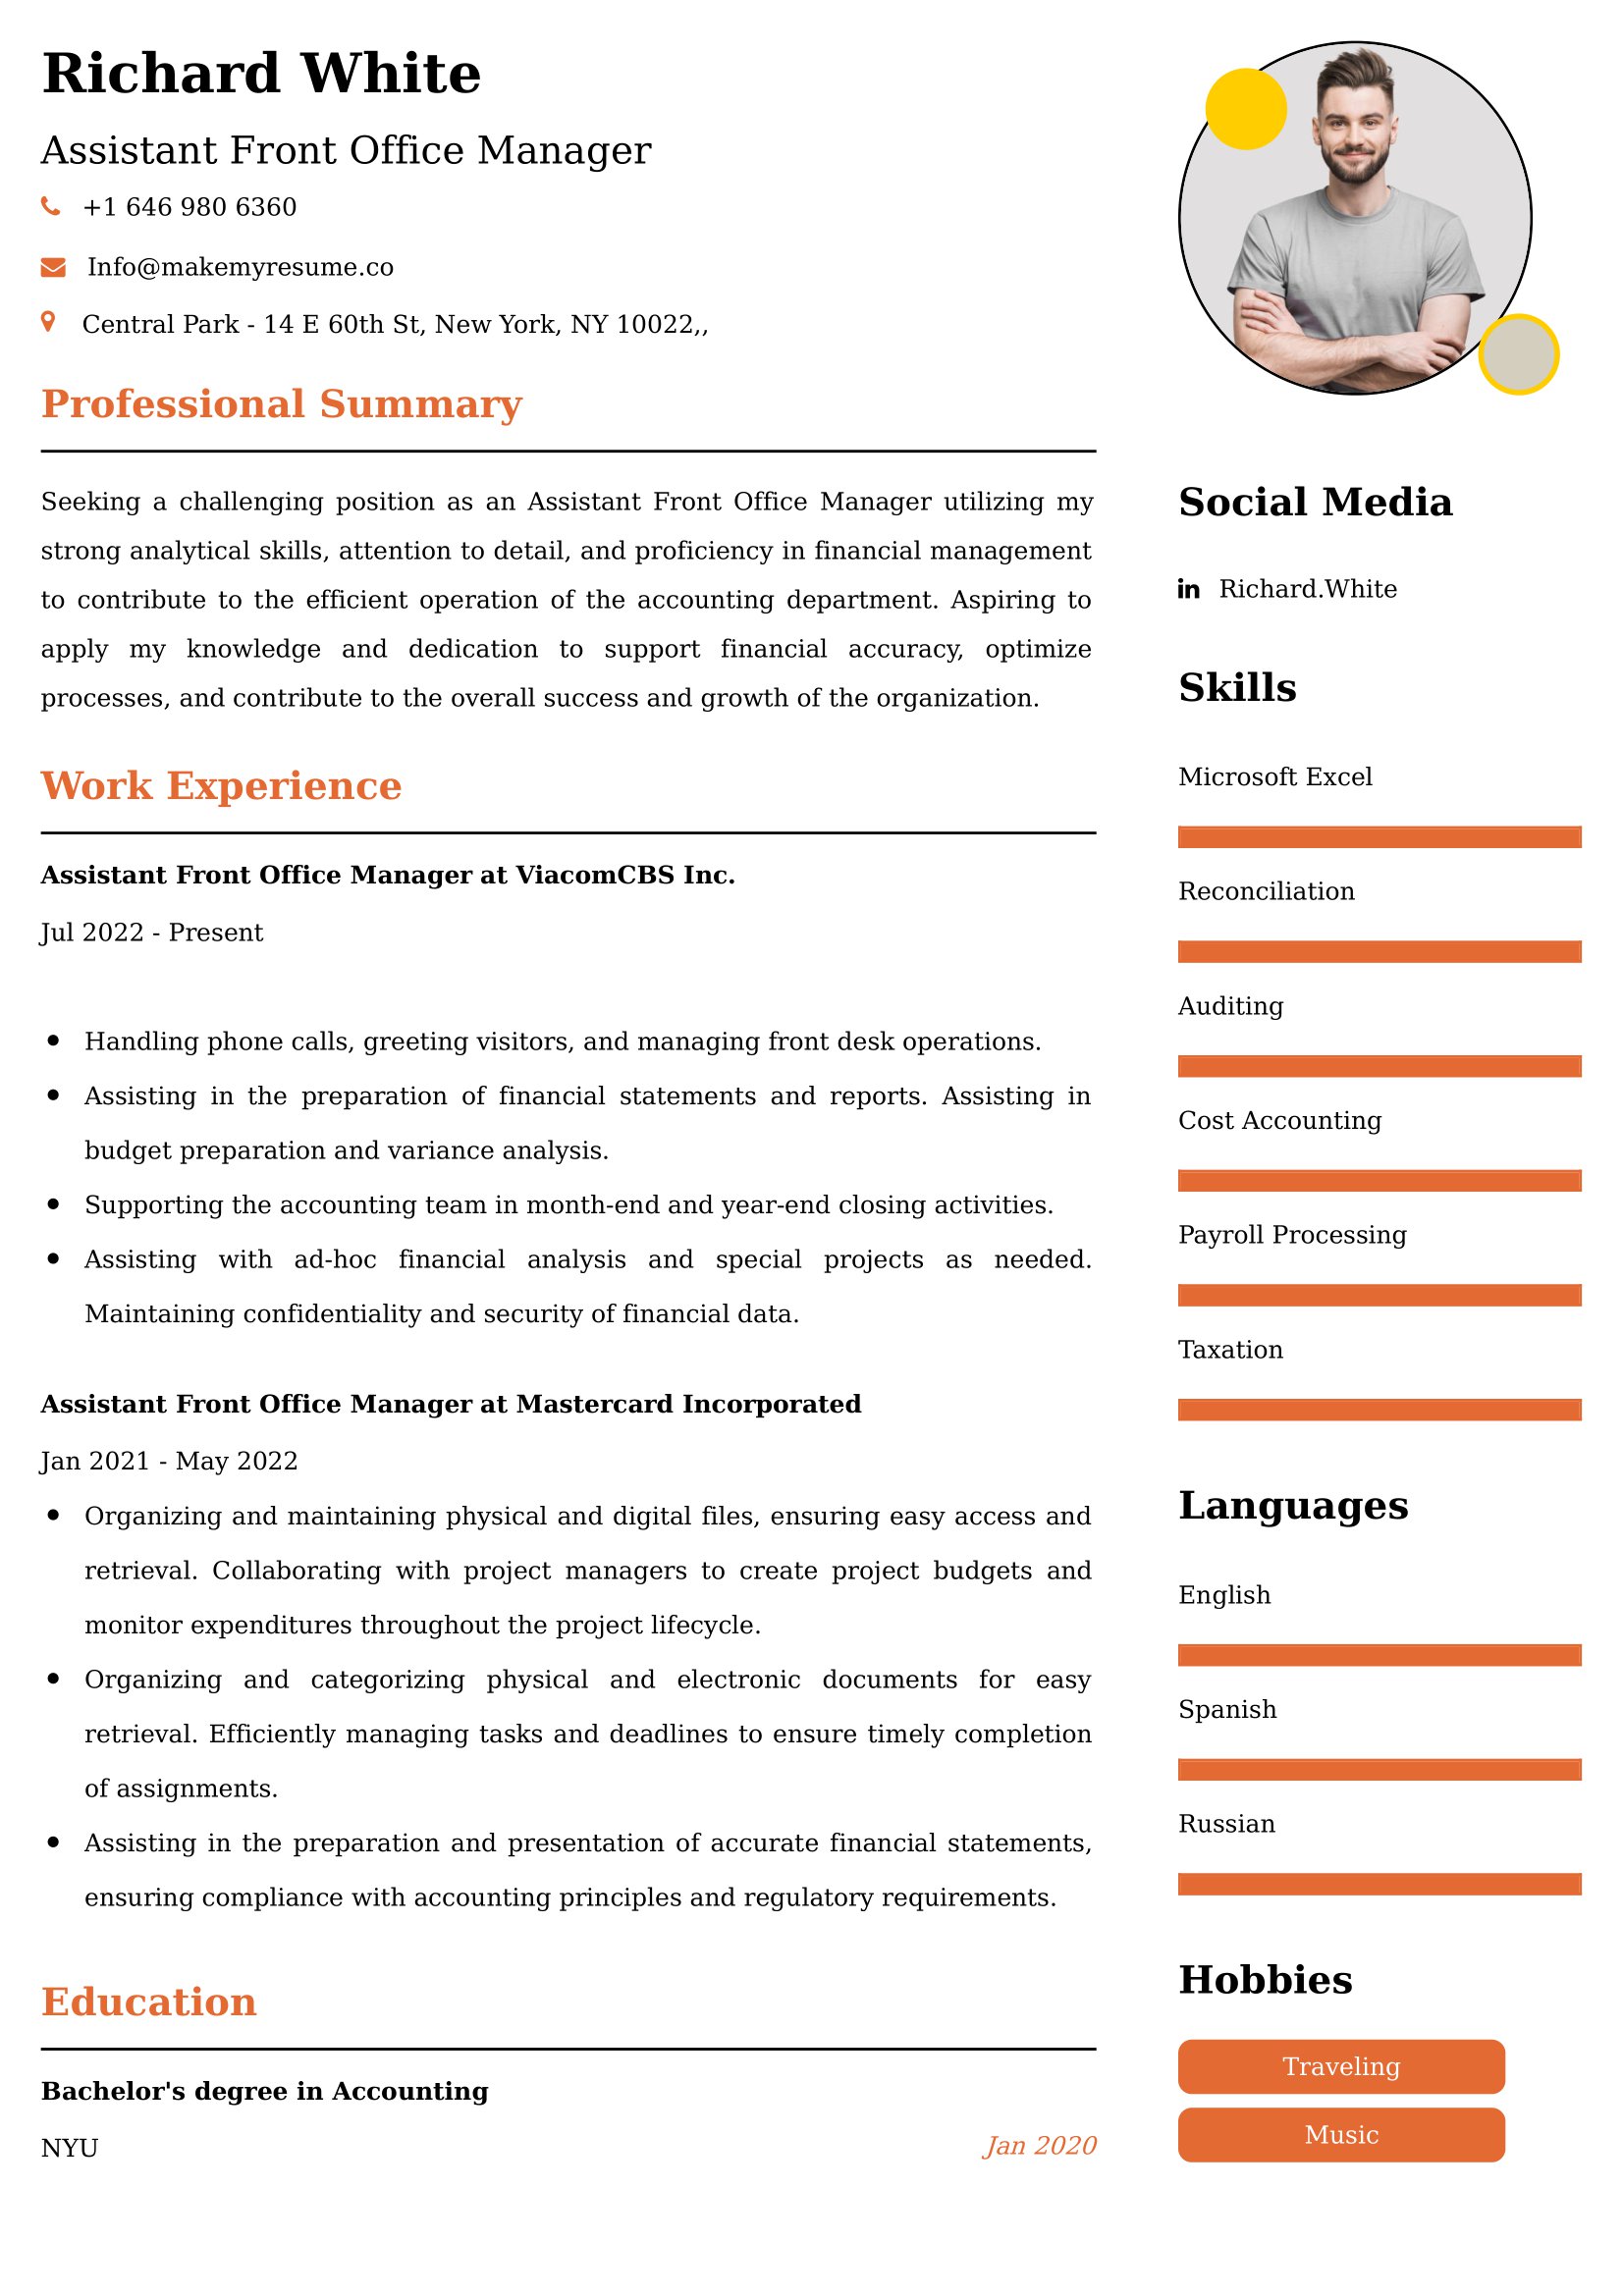 Assistant Front Office Manager Resume Examples - Brazilian Format, Latest Template